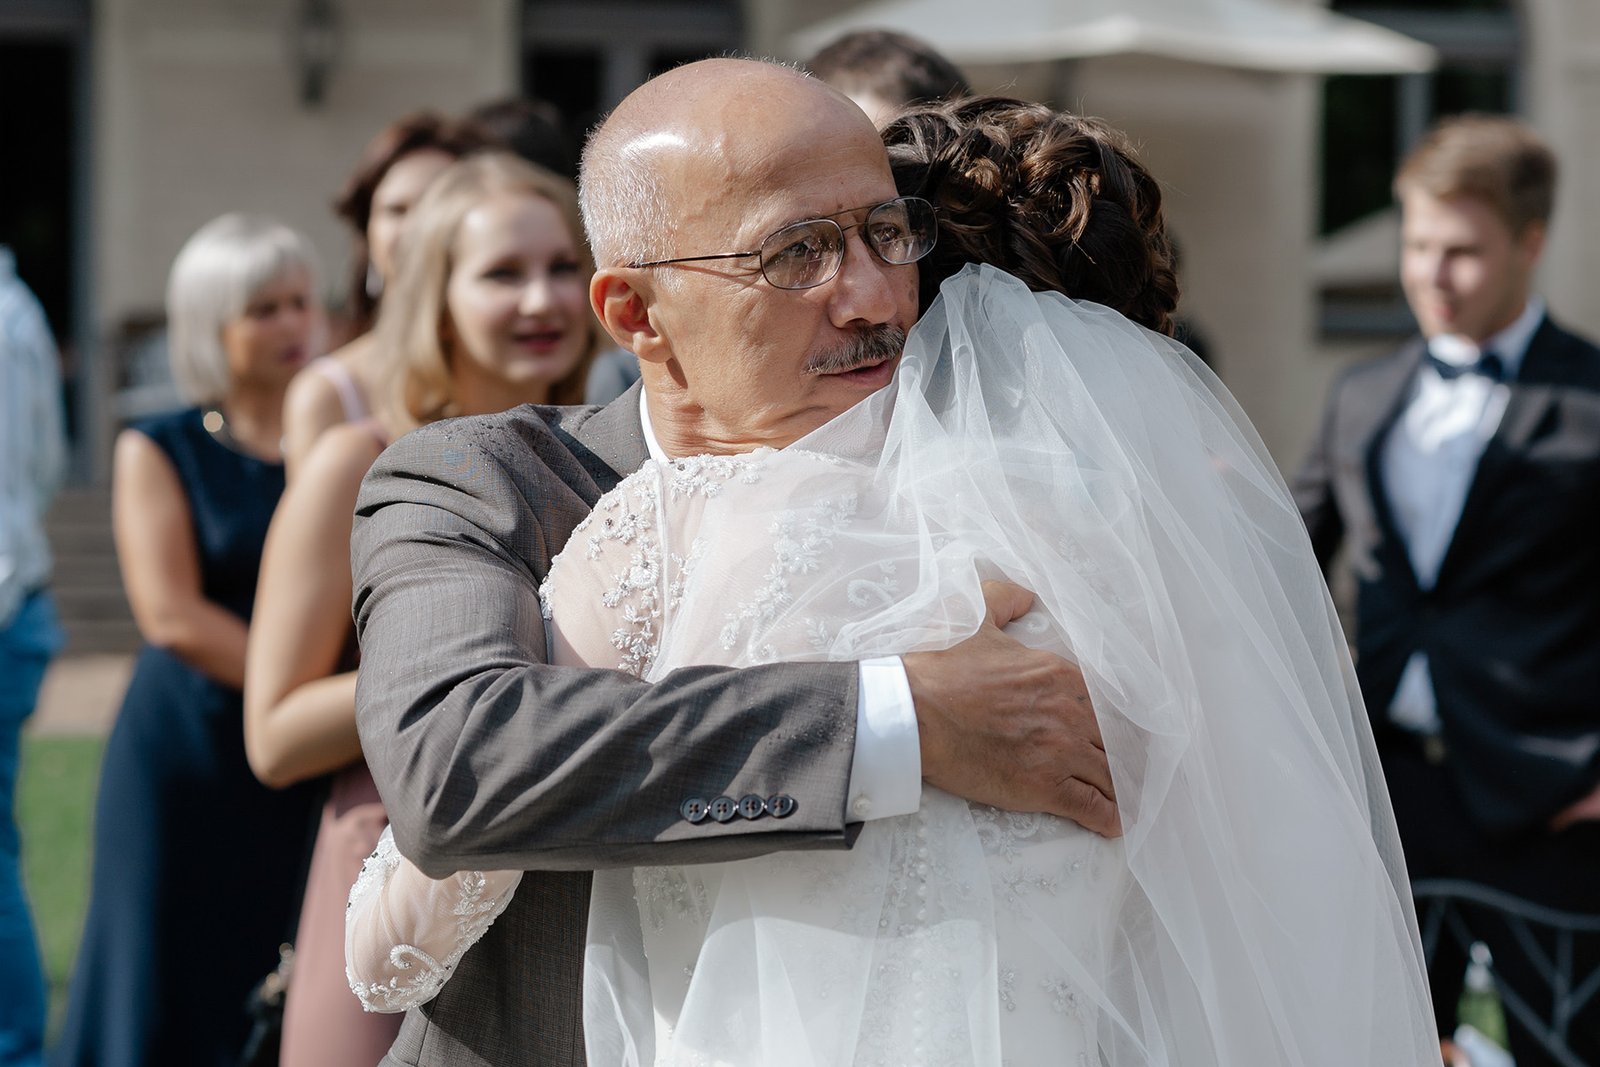 Congratulations from the father to the bride